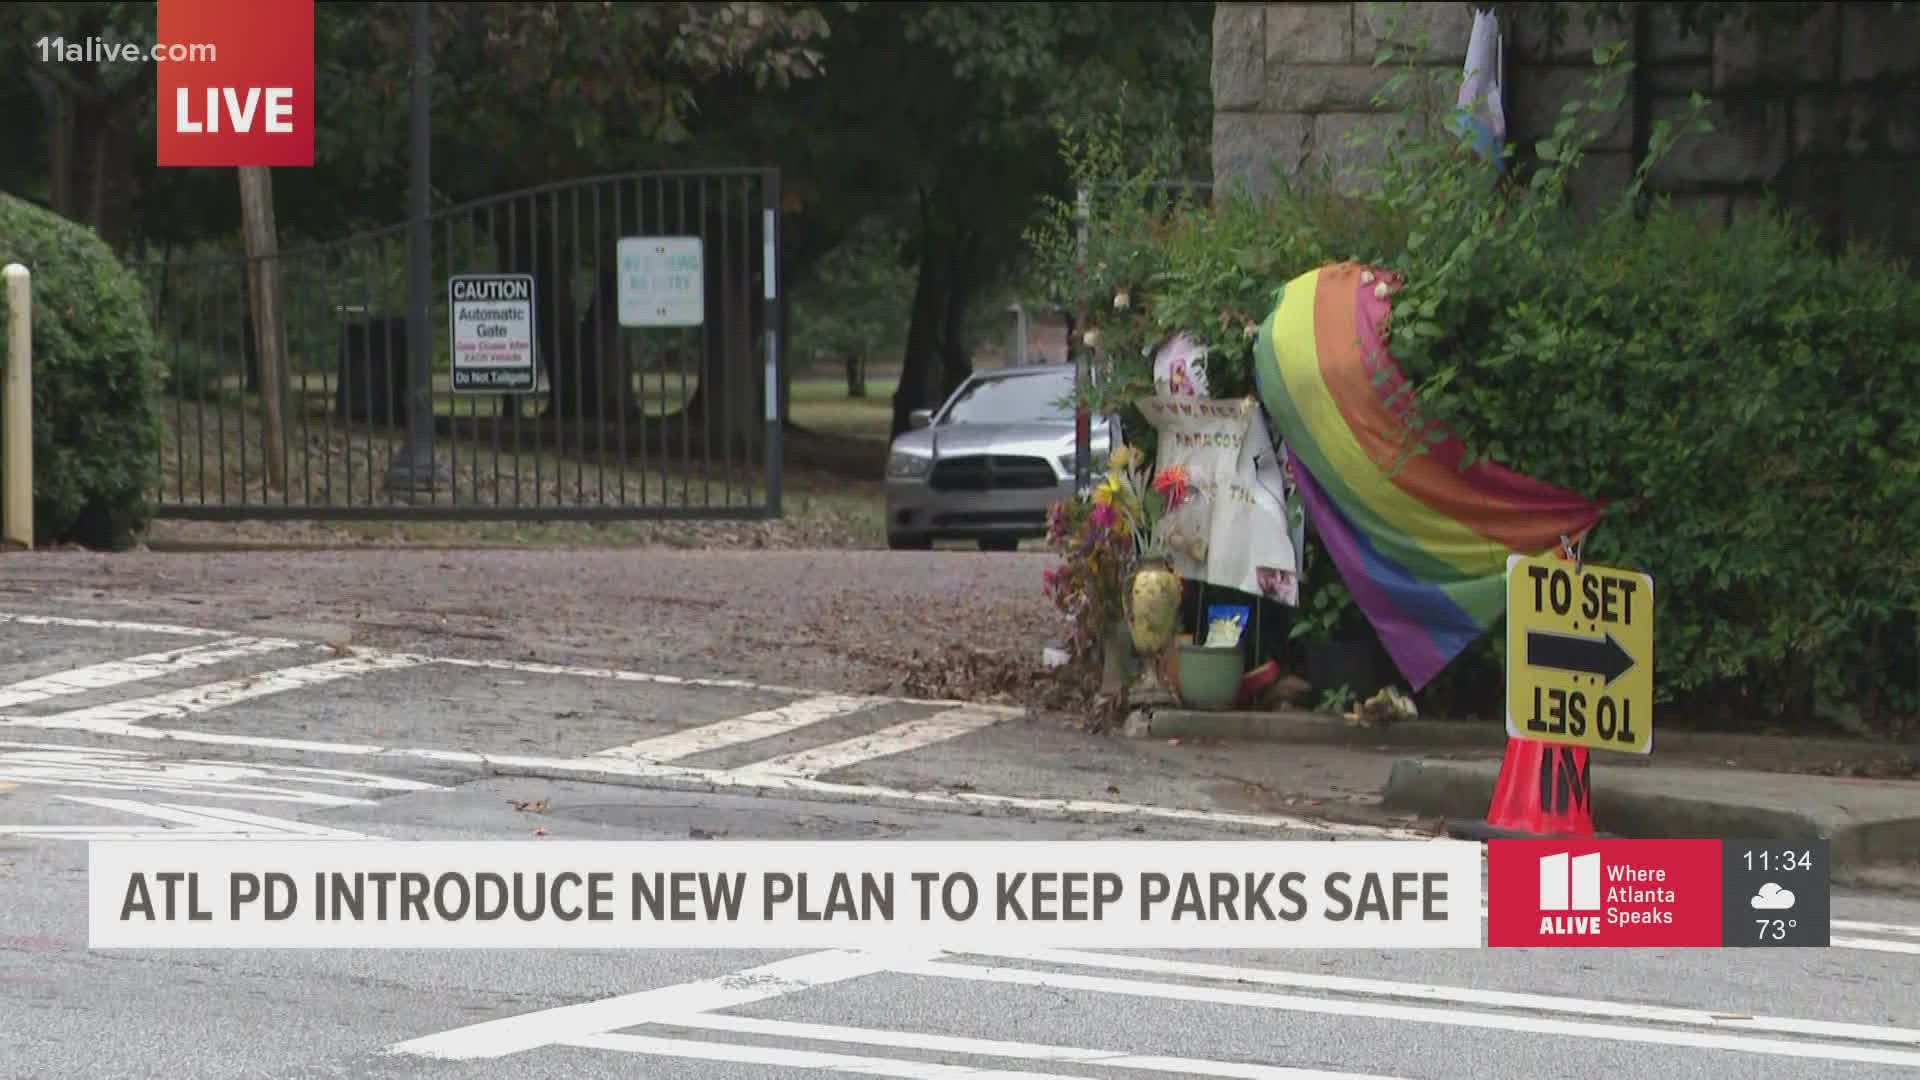 Part of the reason there has been so much focus on crime in parks is because of the killing of Katie Janness at Piedmont Park this summer.